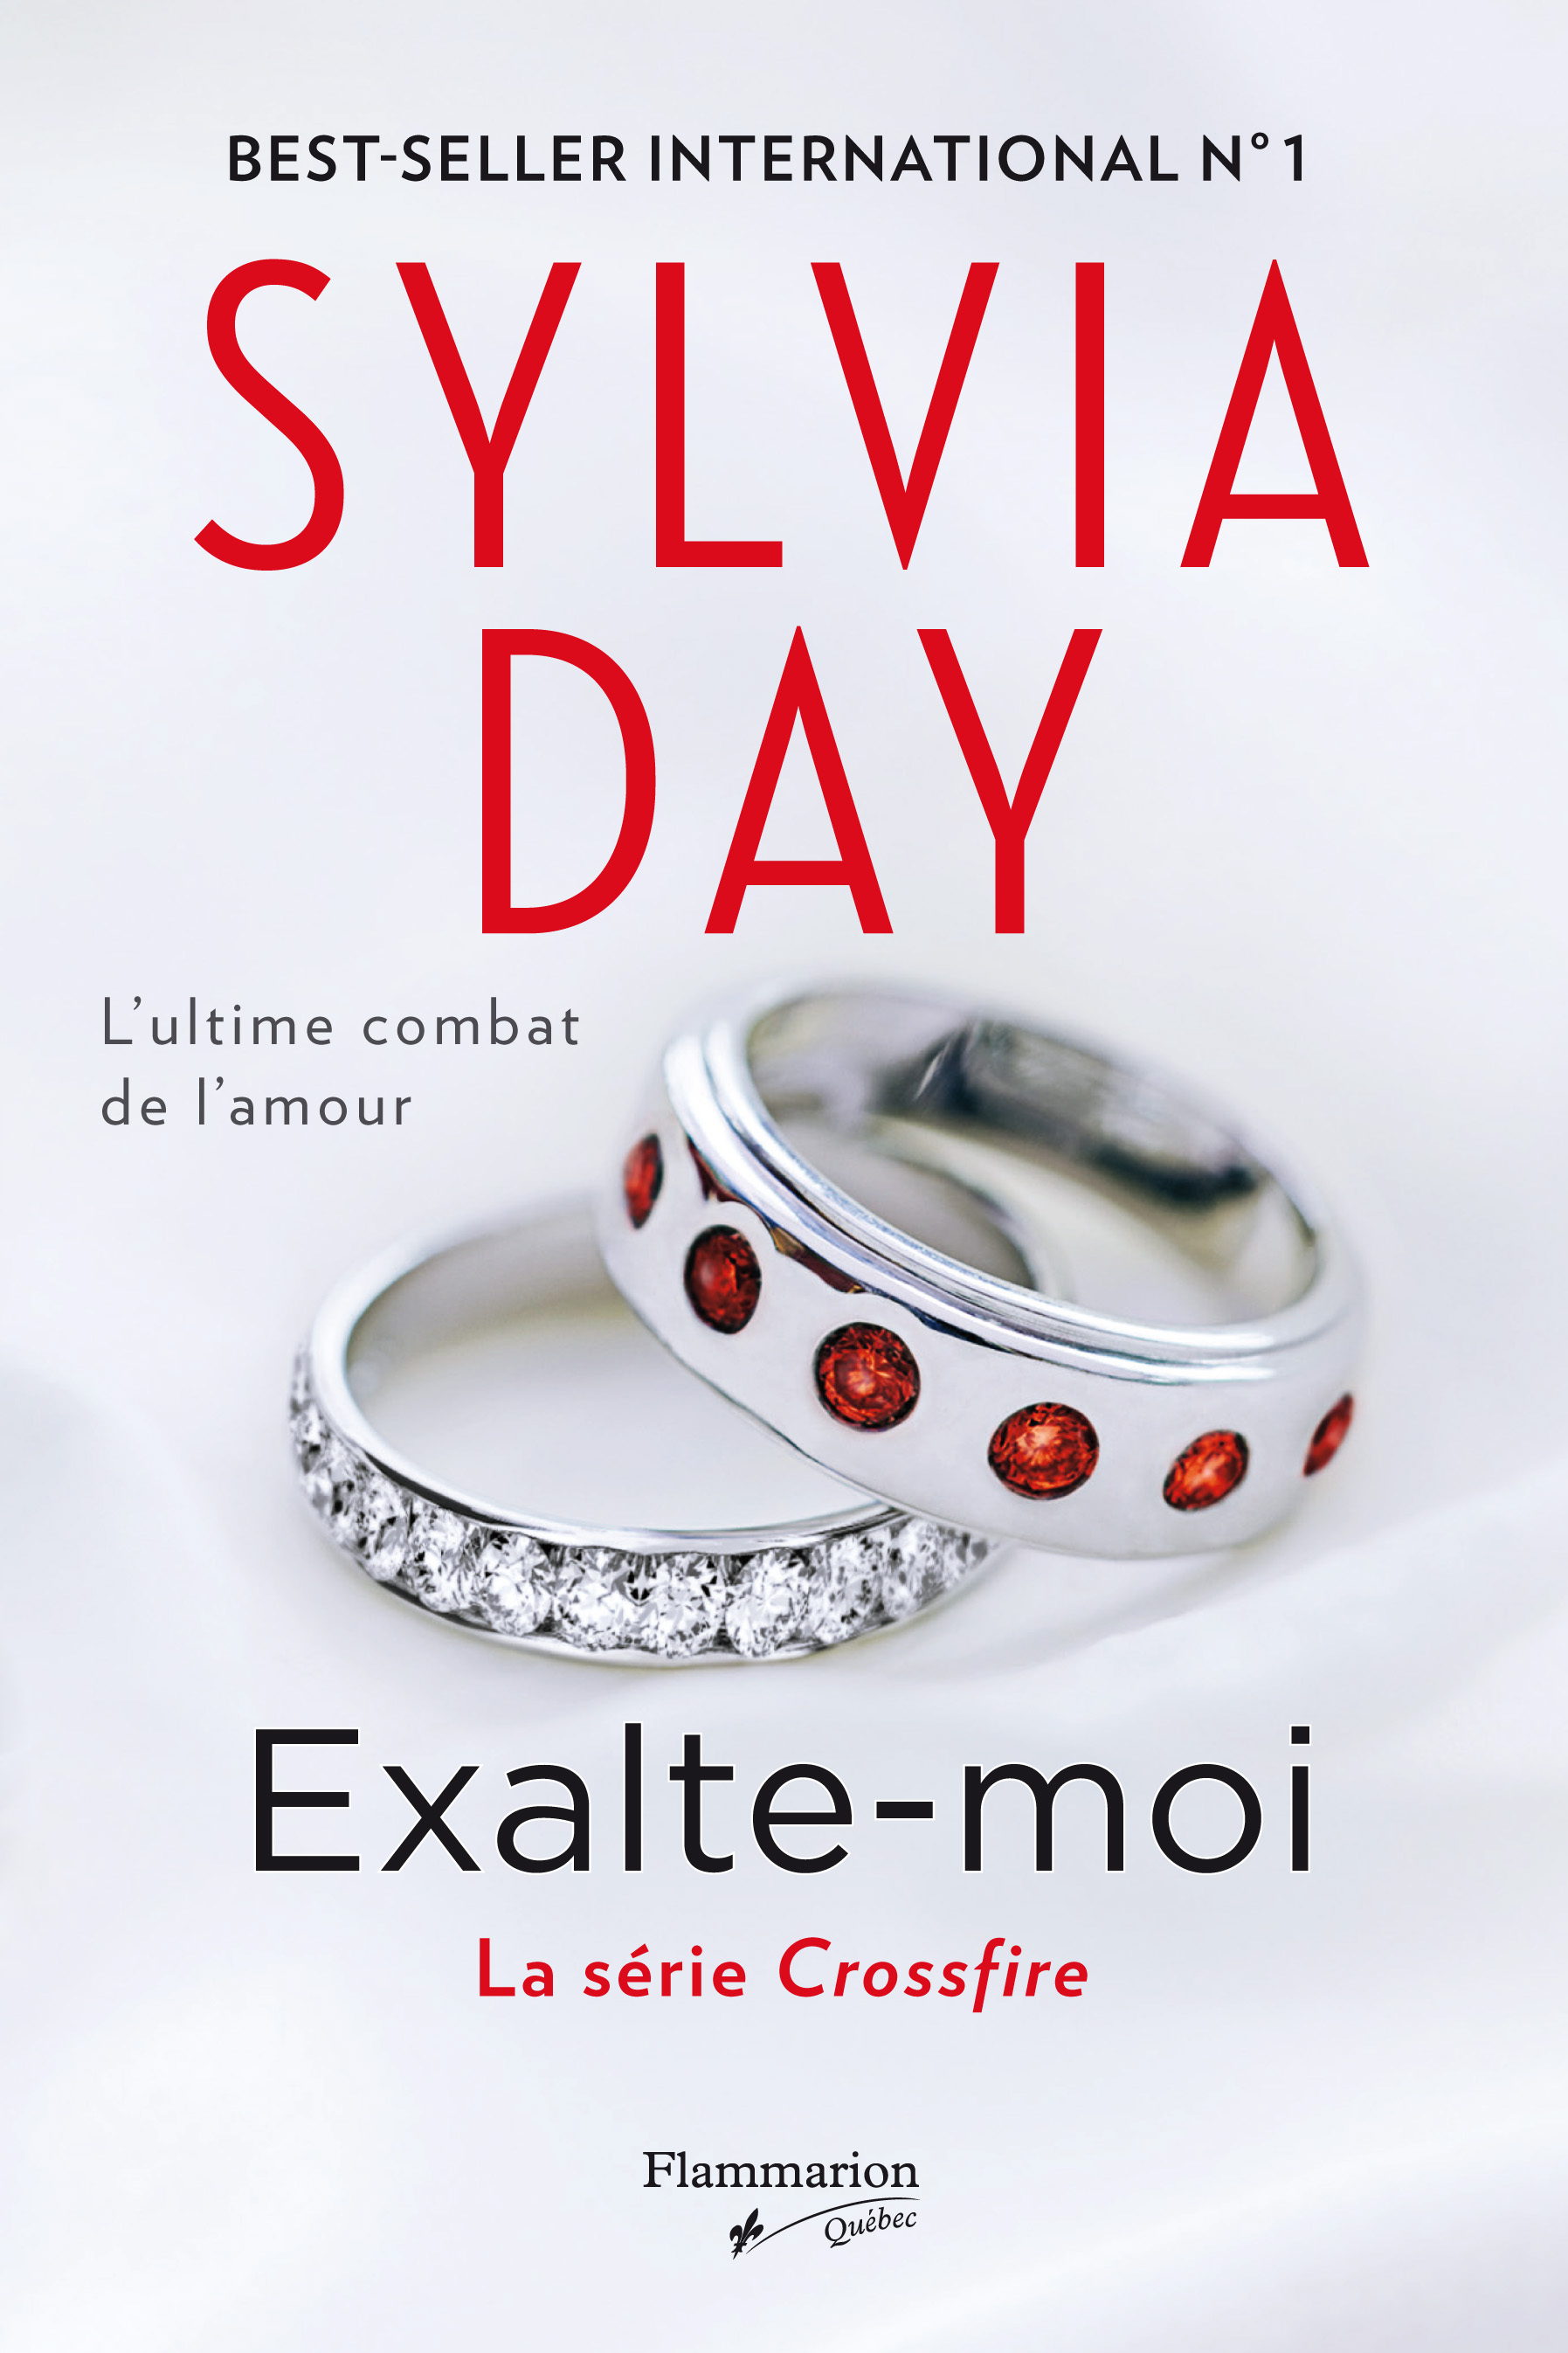 one with you sylvia day mobi